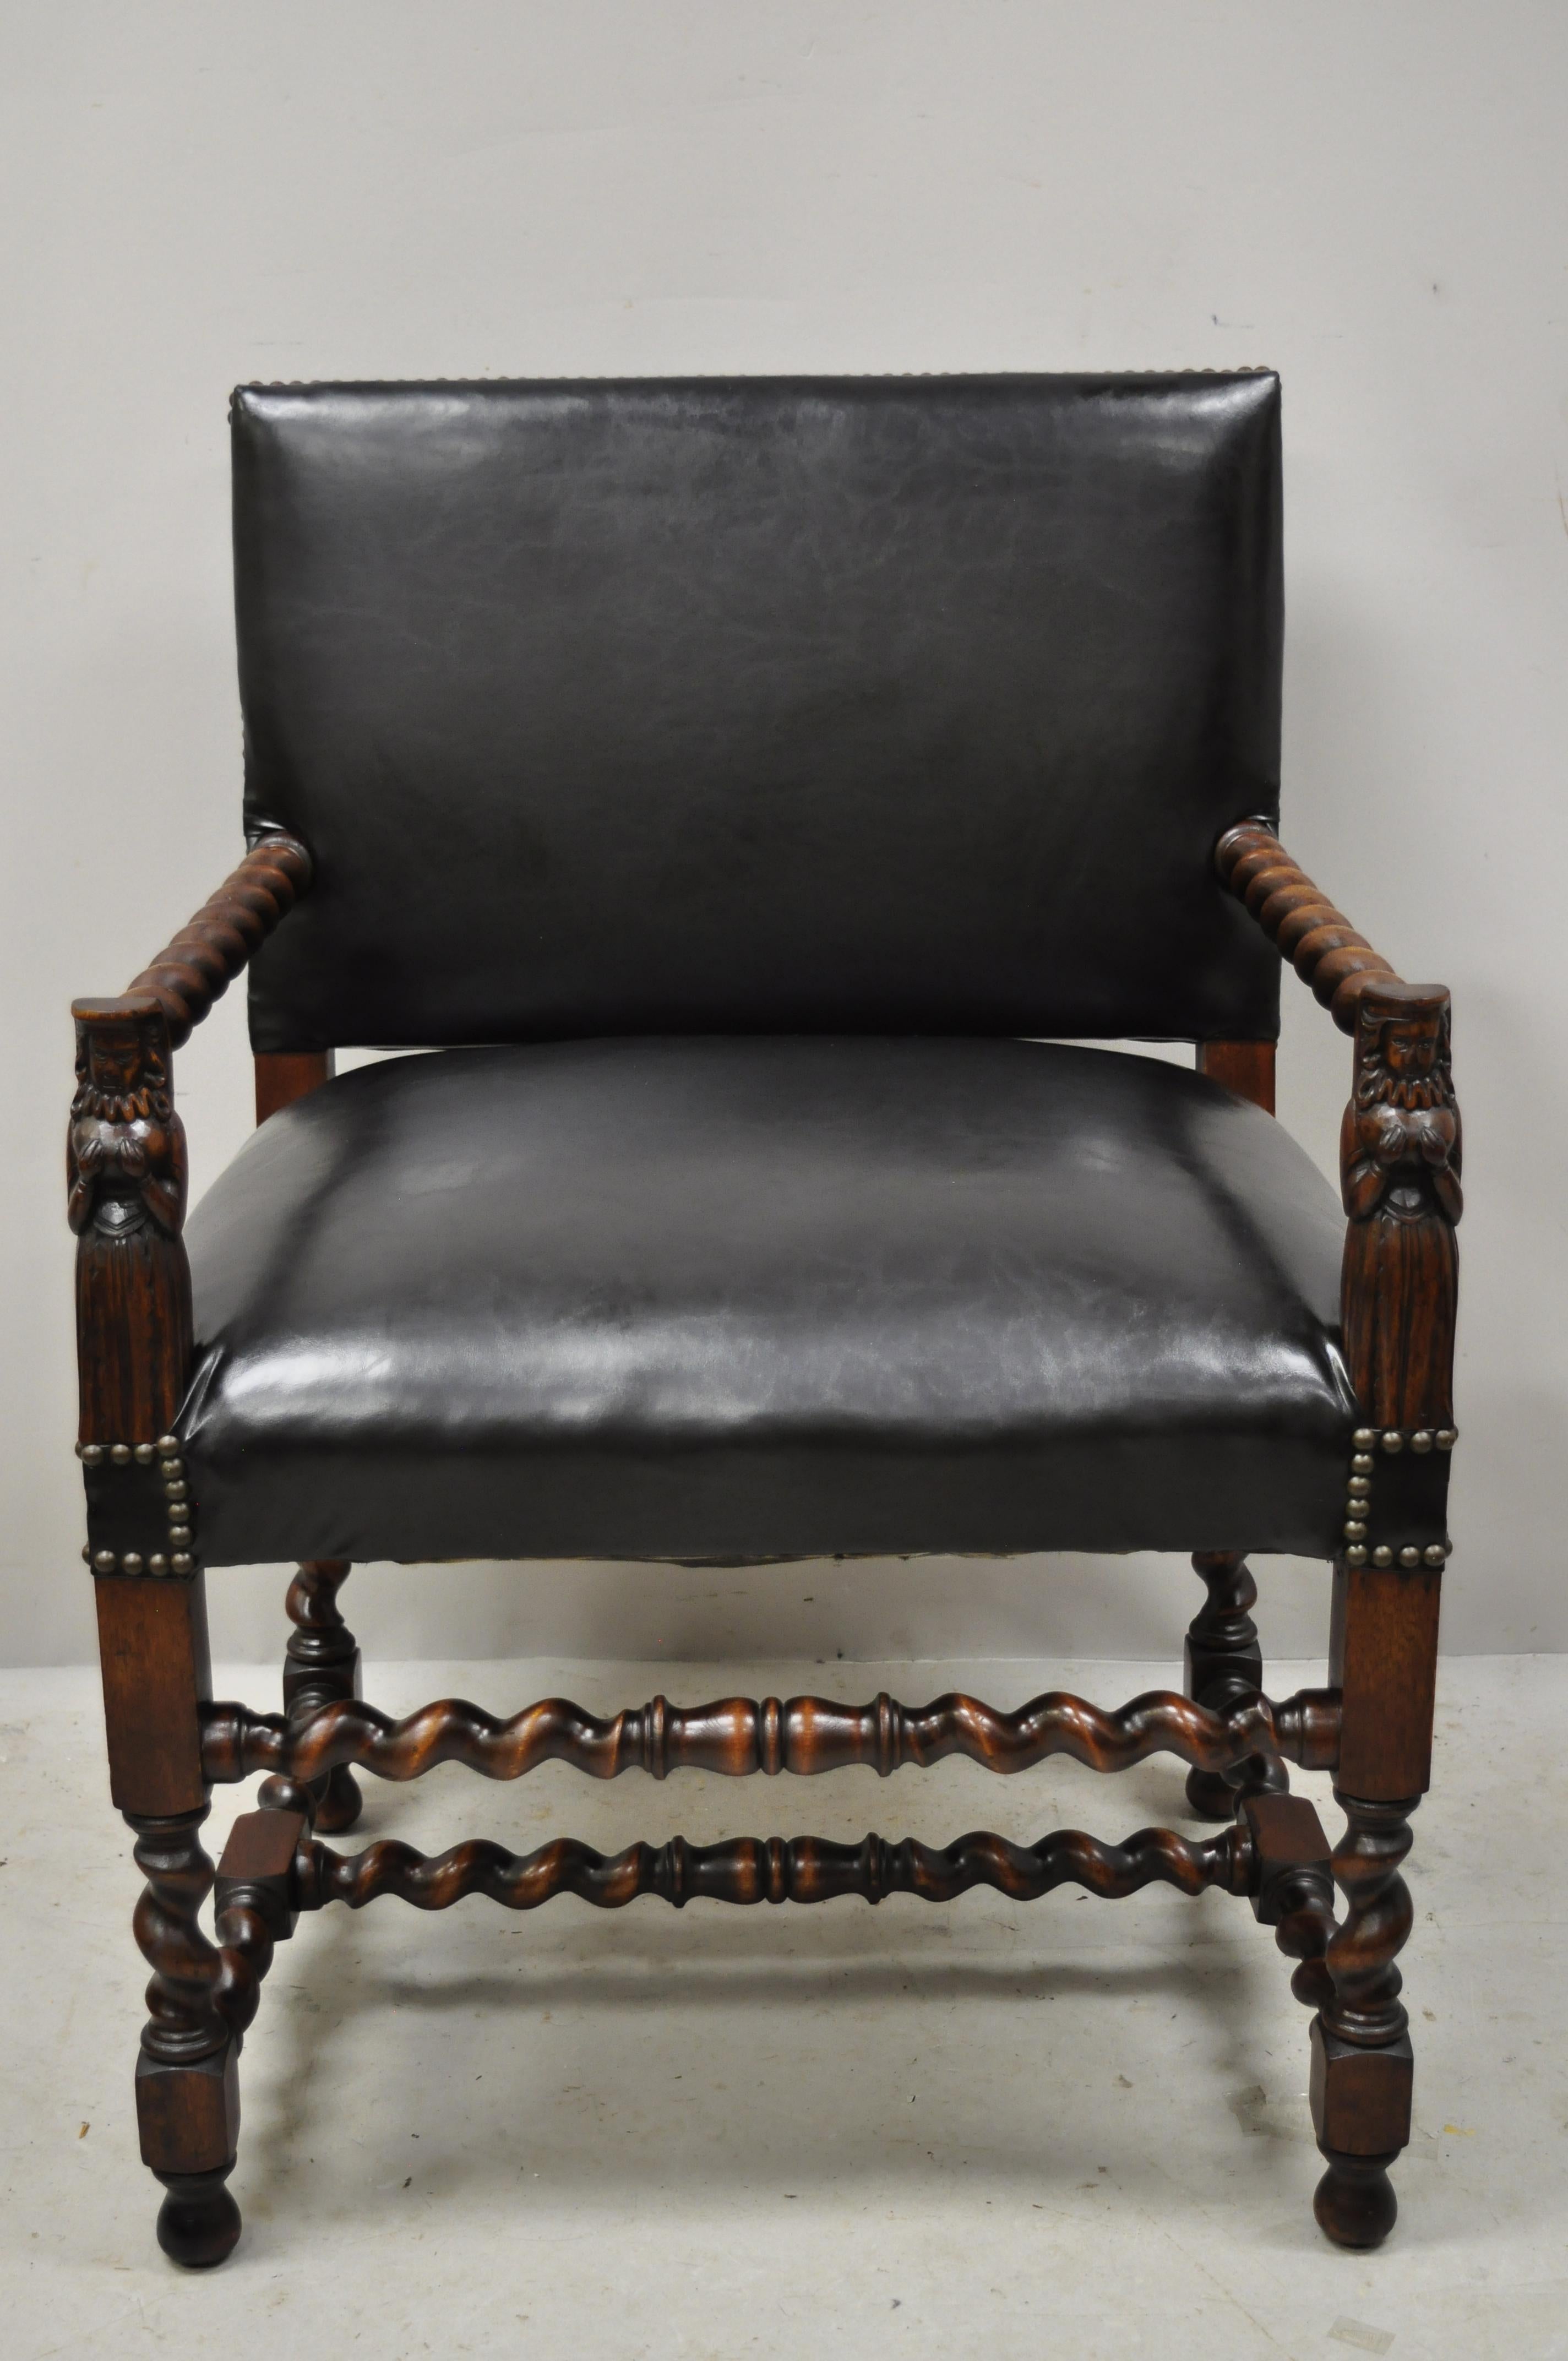 Antique Italian Renaissance figural spiral carved barley twist walnut throne armchair. Item features carved female figures to arm supports, spiral carved frame, black vinyl upholstery, very nice antique item, great style and form, circa early 1900s.